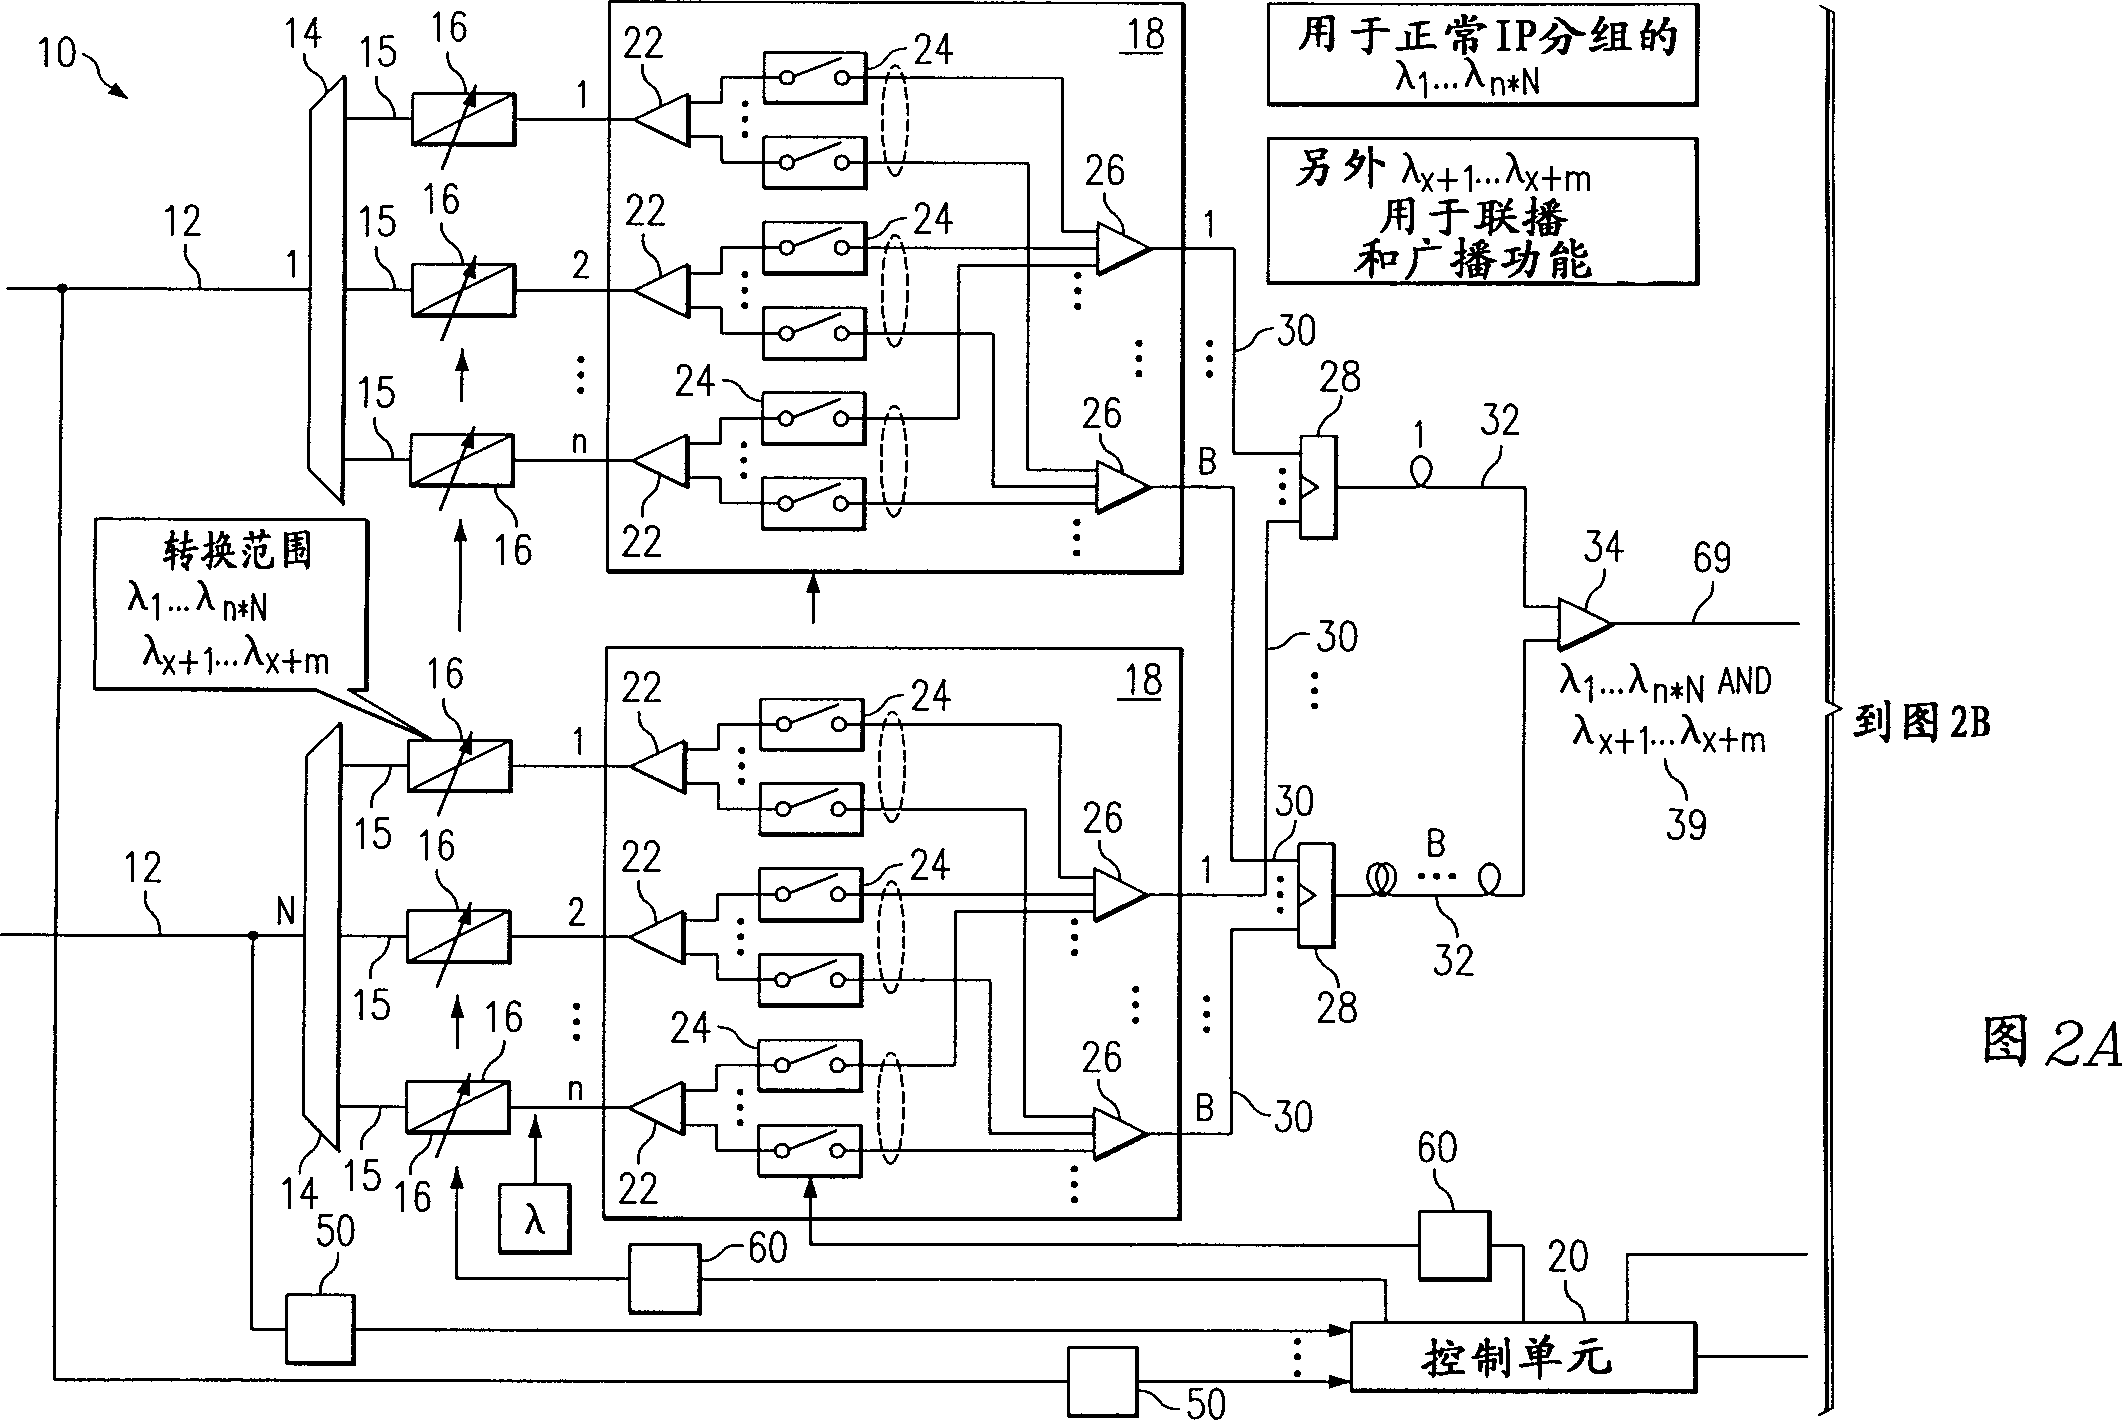 Light IP exchange route structure